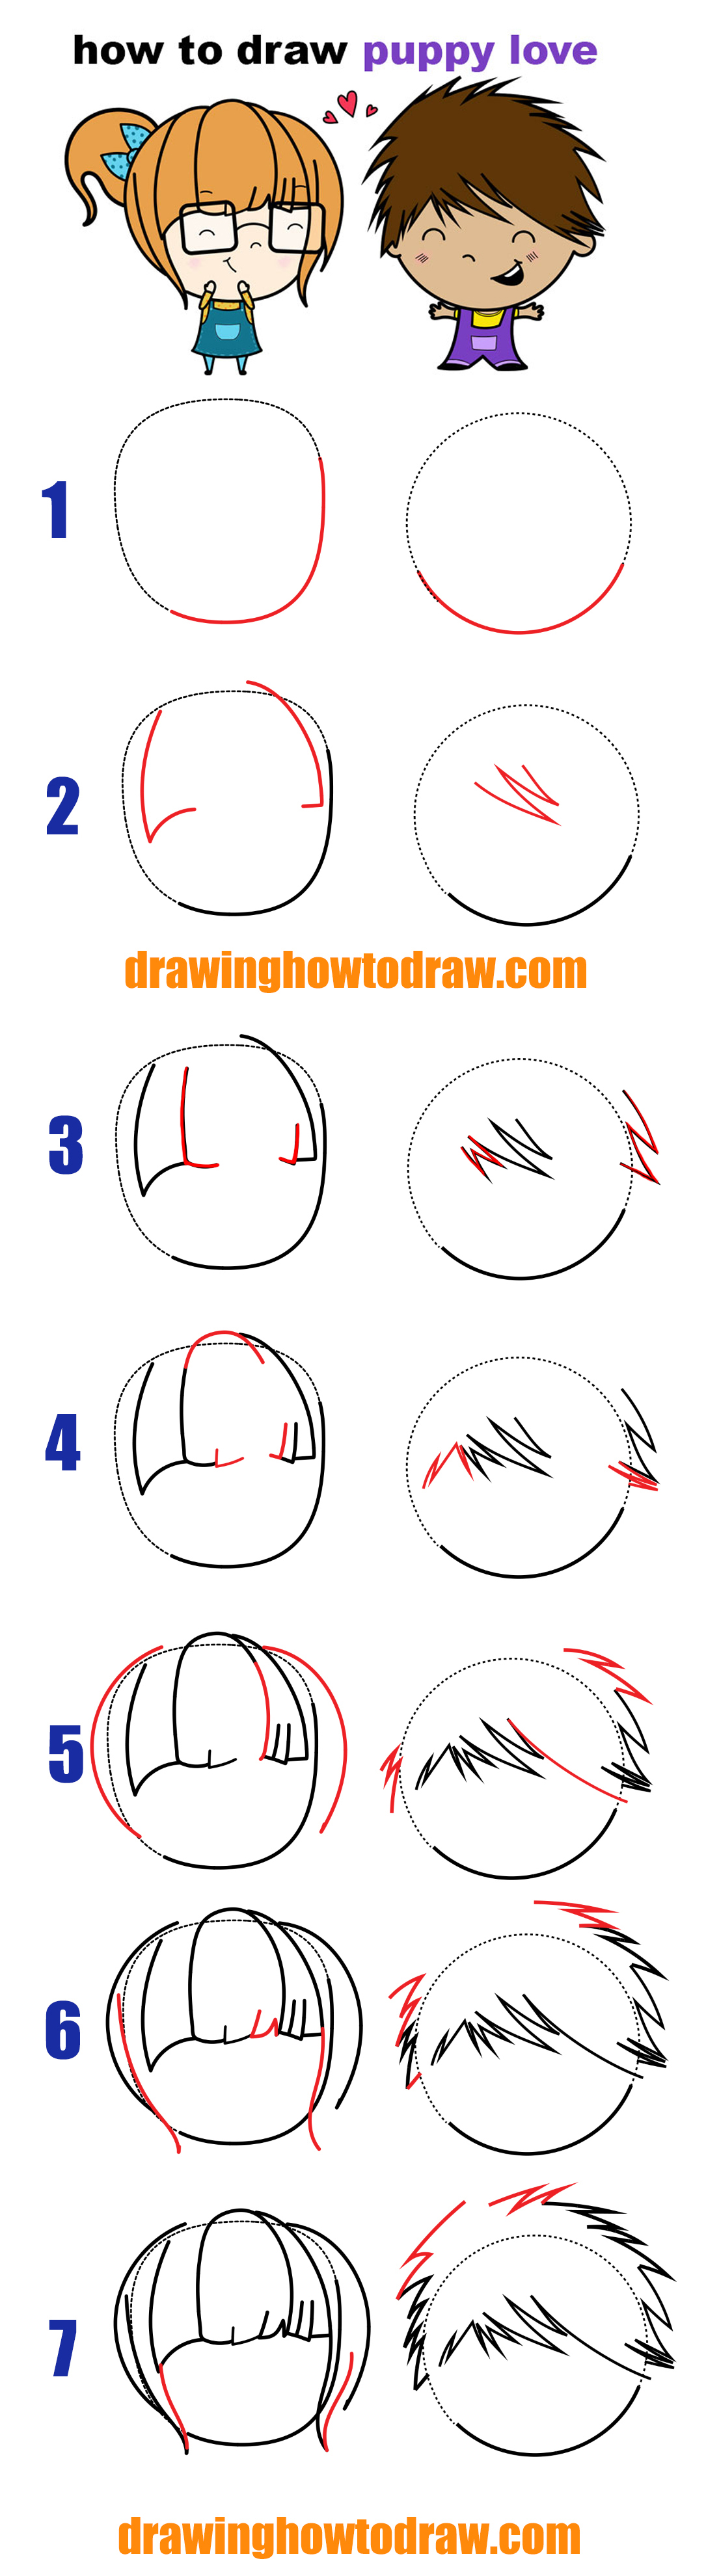 How to Draw a Cartoon Boy Step by Step Drawing Tutorial for Beginners -  YouTube